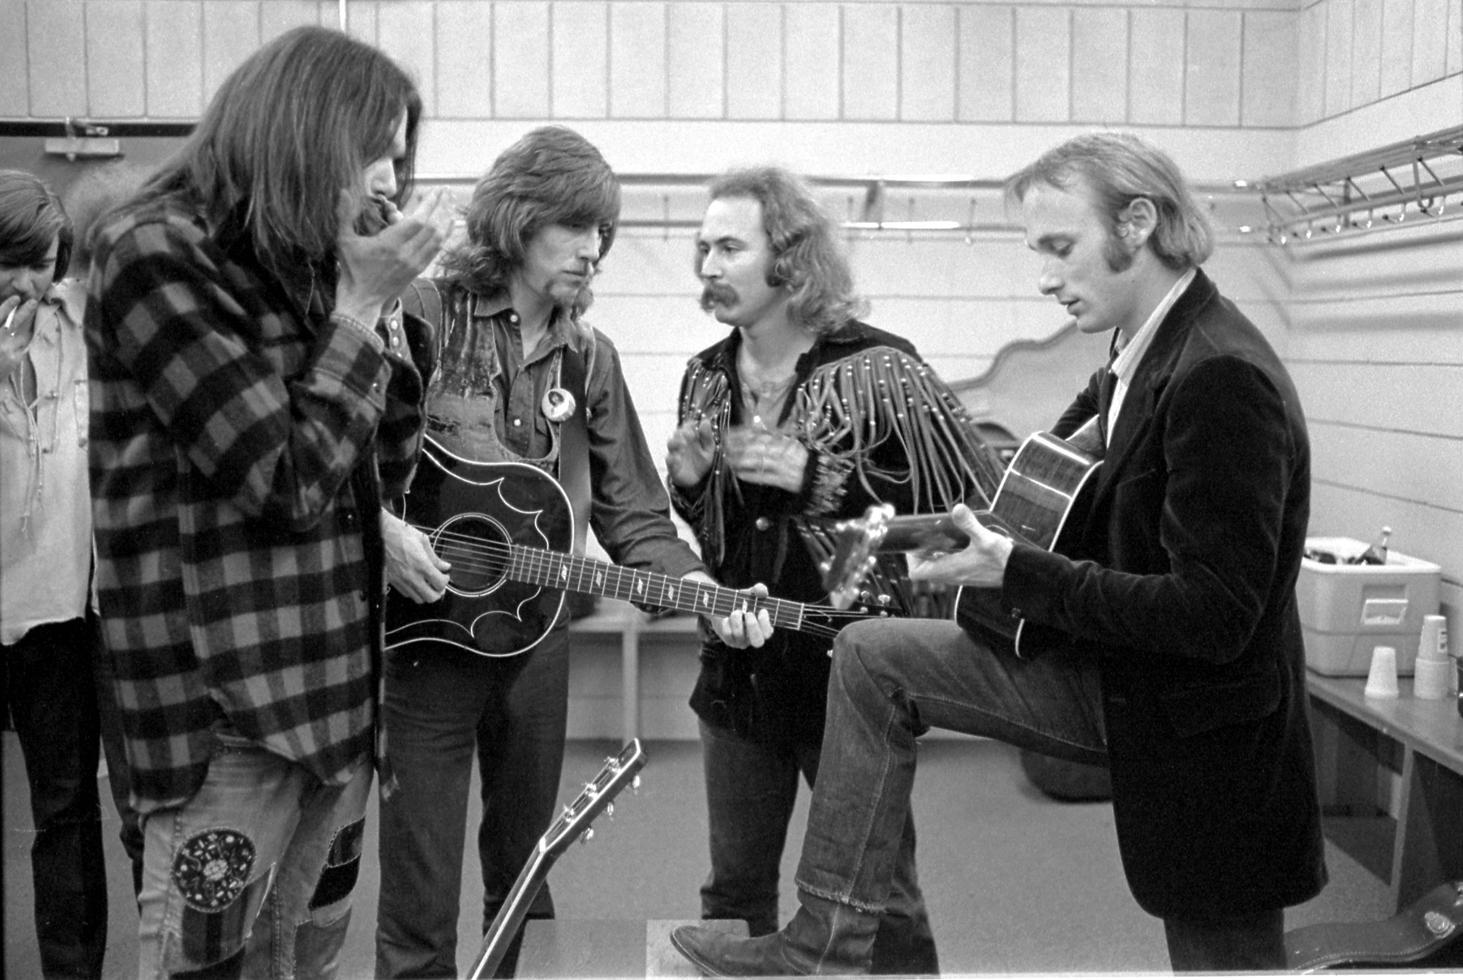 Henry Diltz Black and White Photograph – Crosby, Stills, Nash, & Young, 1970